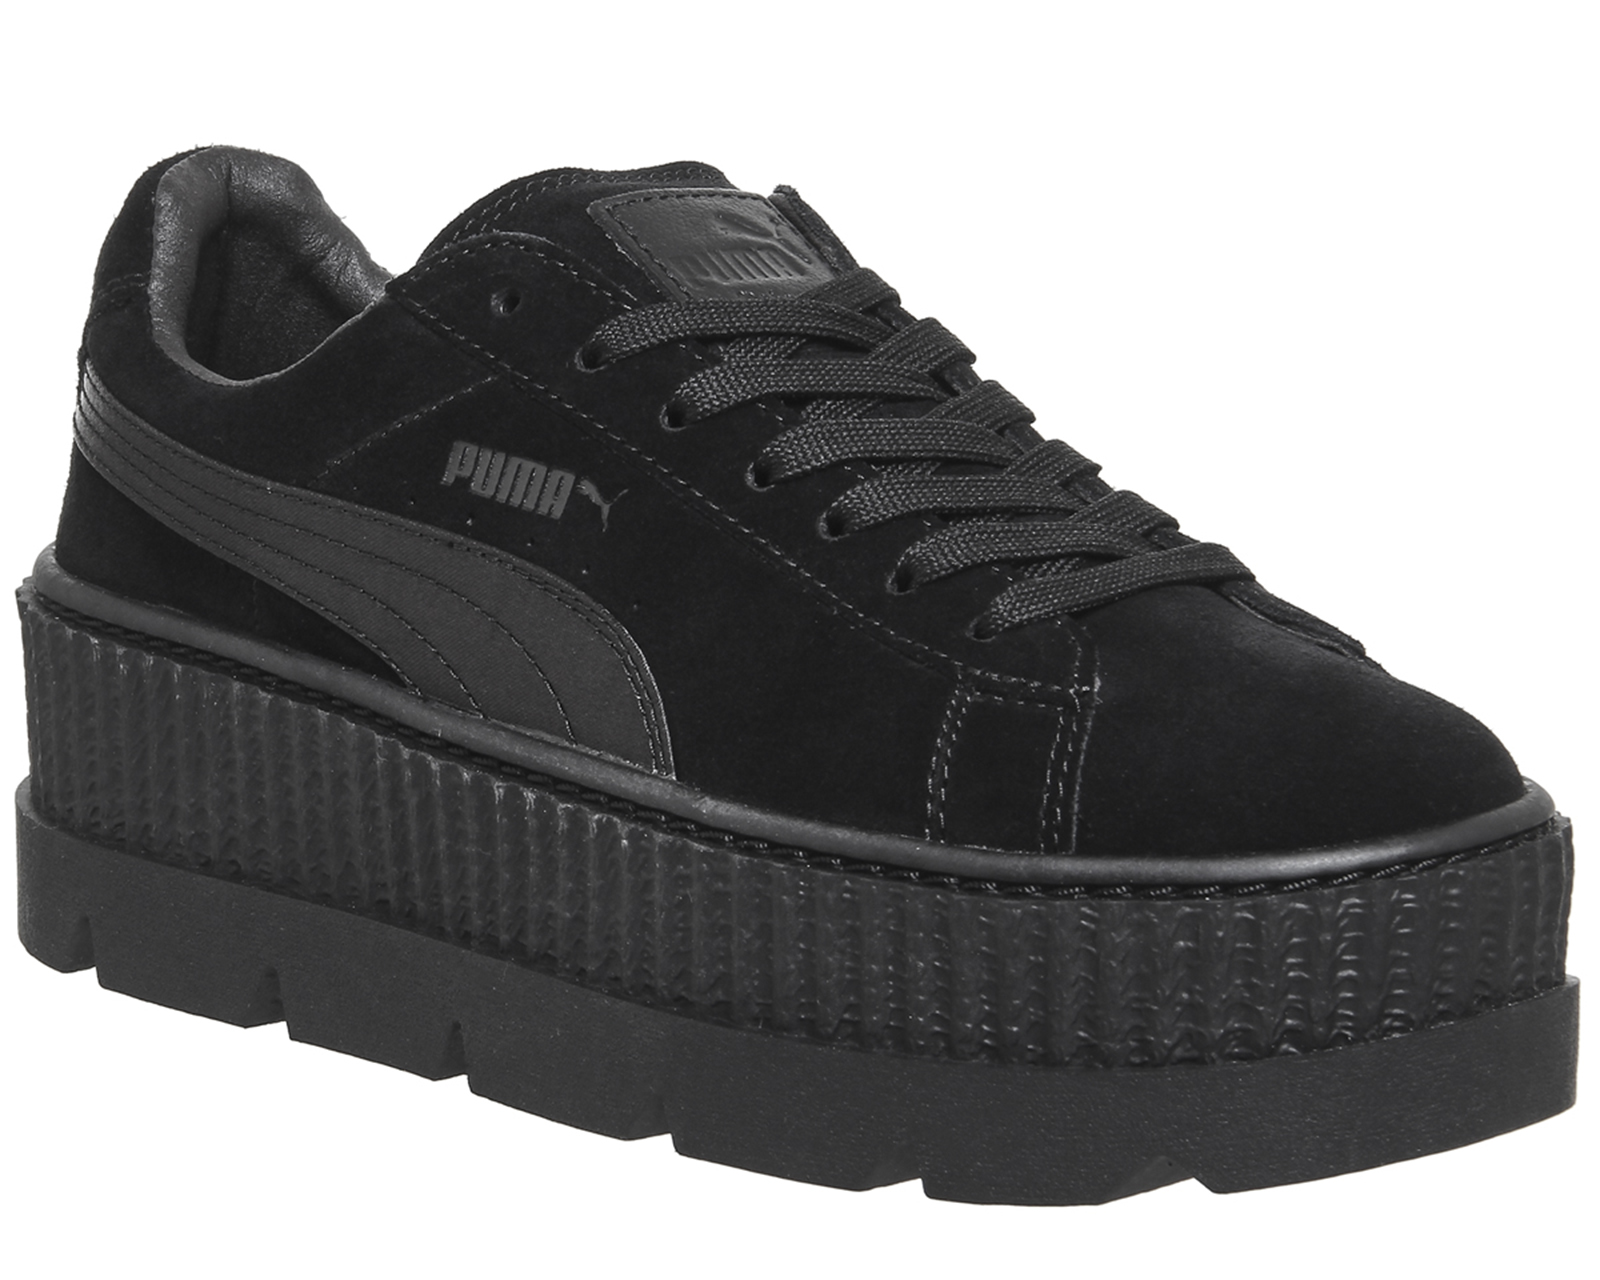 Puma Fenty Cleated Creepers Black Suede 